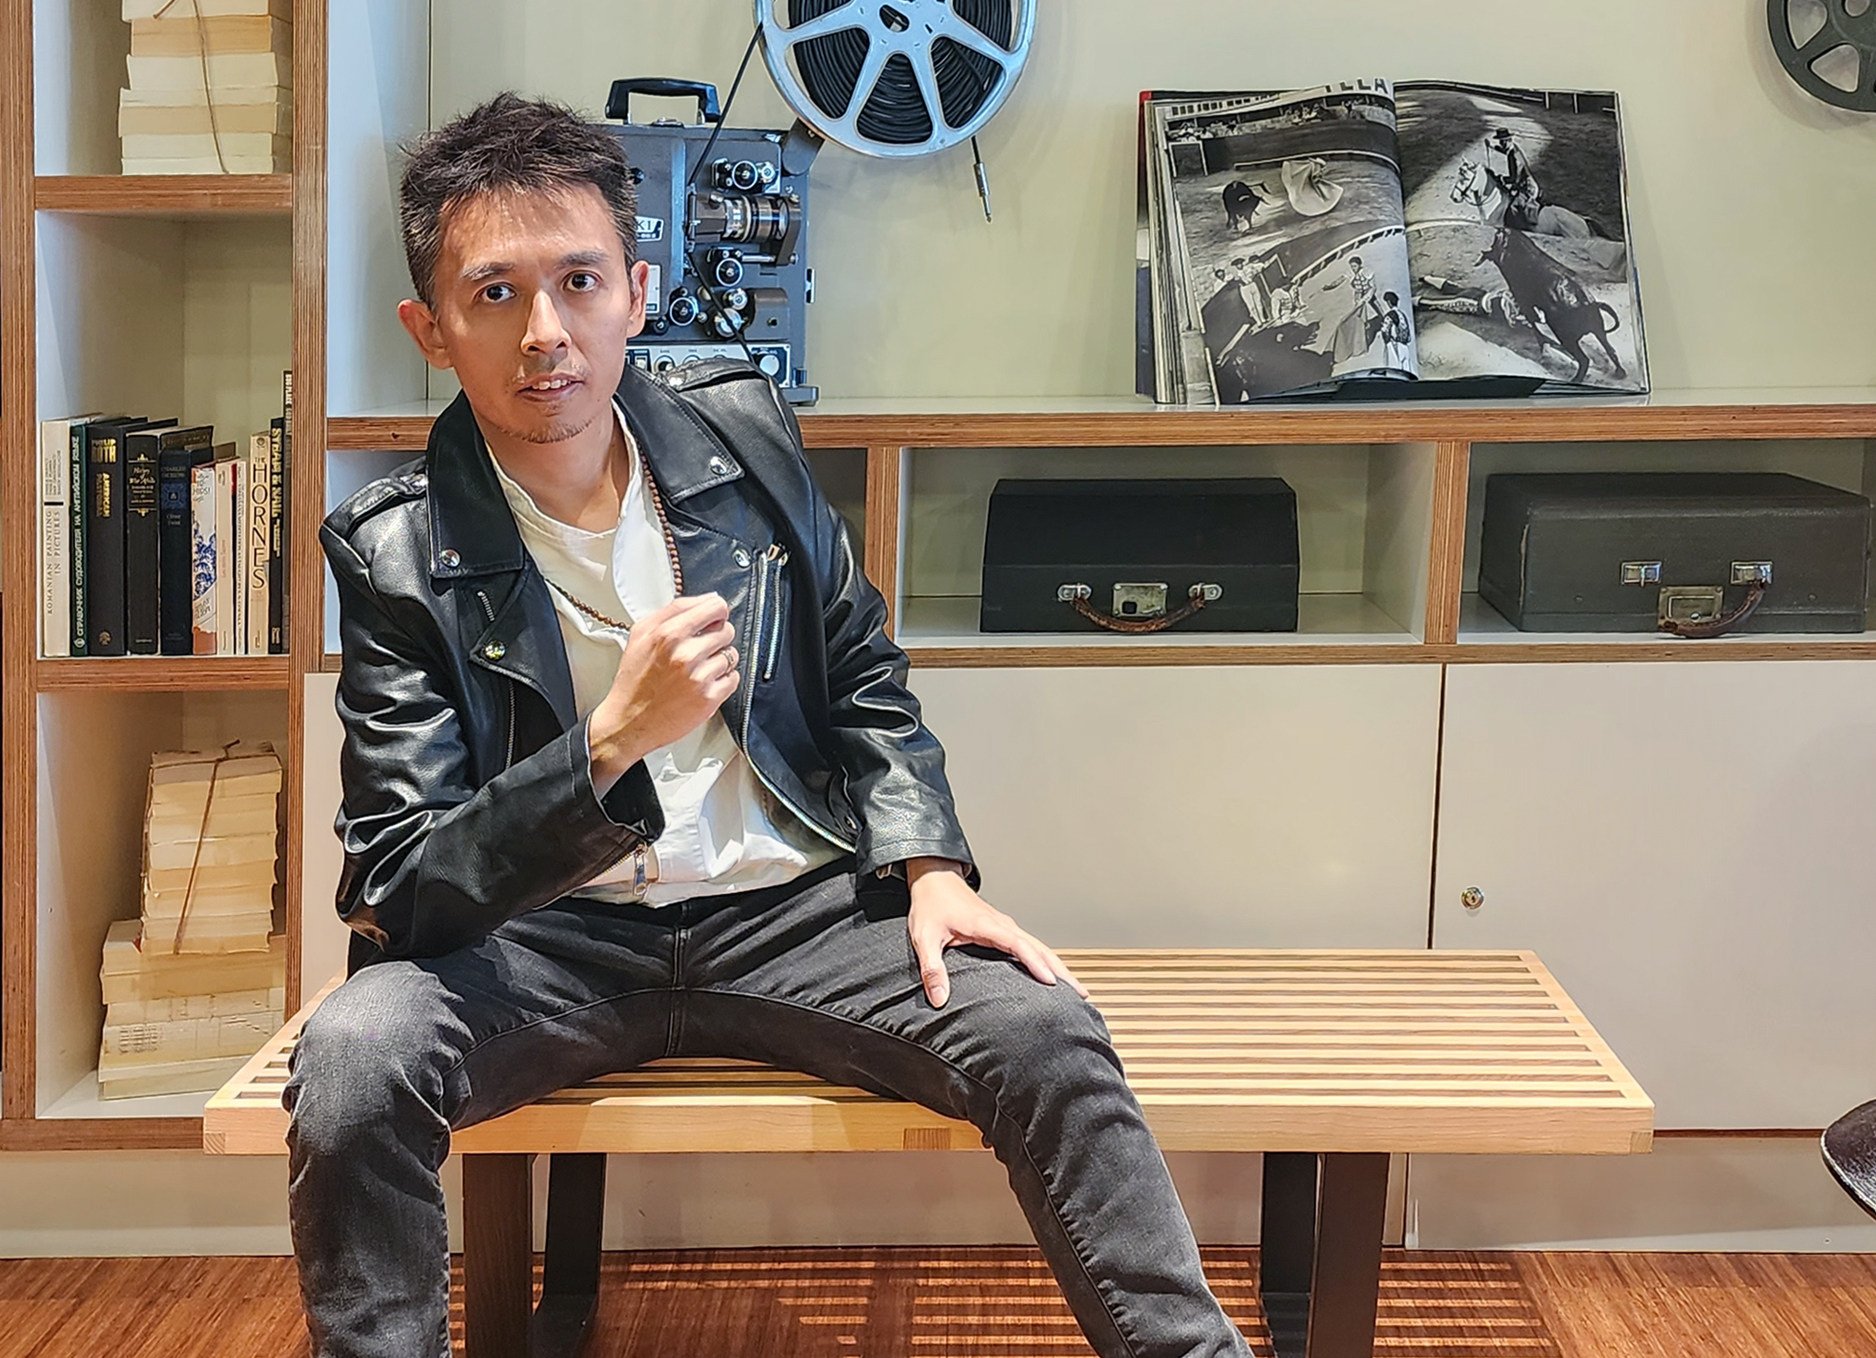 “Rebel” Singaporean filmmaker Tzang Merwyn Tong talks about why he can’t be pigeonholed, and how renewed interest in his movies about outsiders signals a bright future for Southeast Asian independent cinema. Photo: Tzang Merwyn Tong